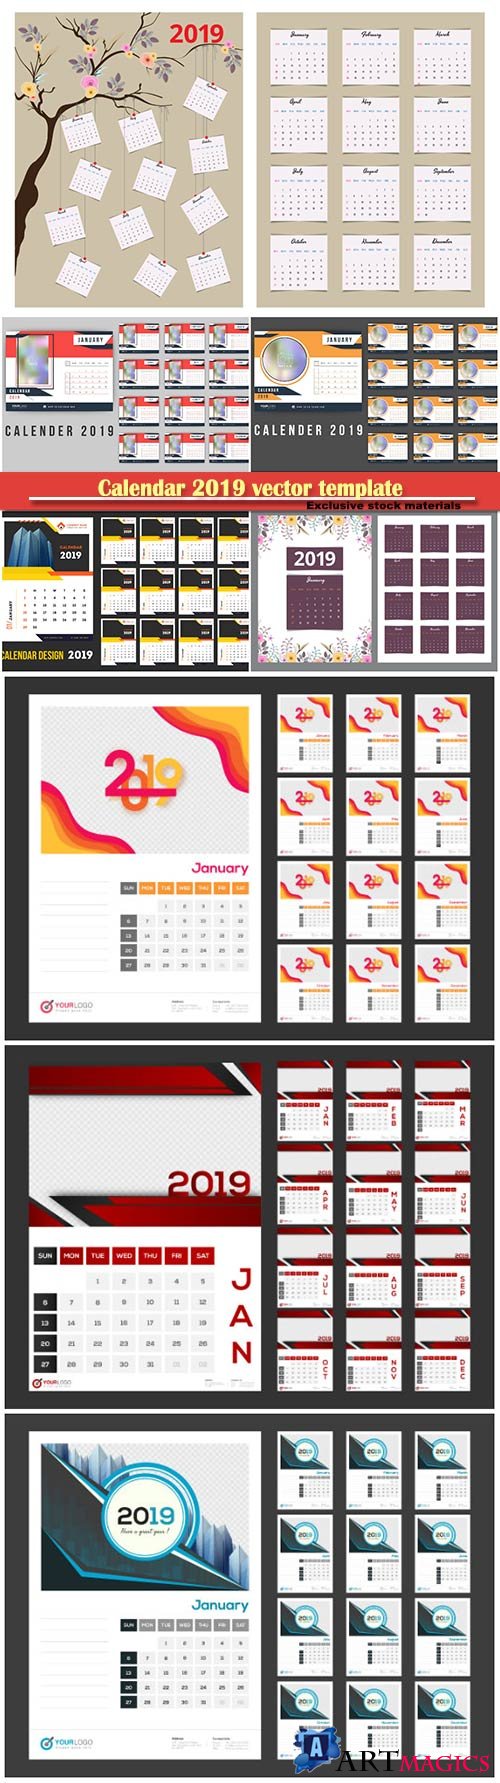 Calendar 2019 vector template, 12 months included # 4